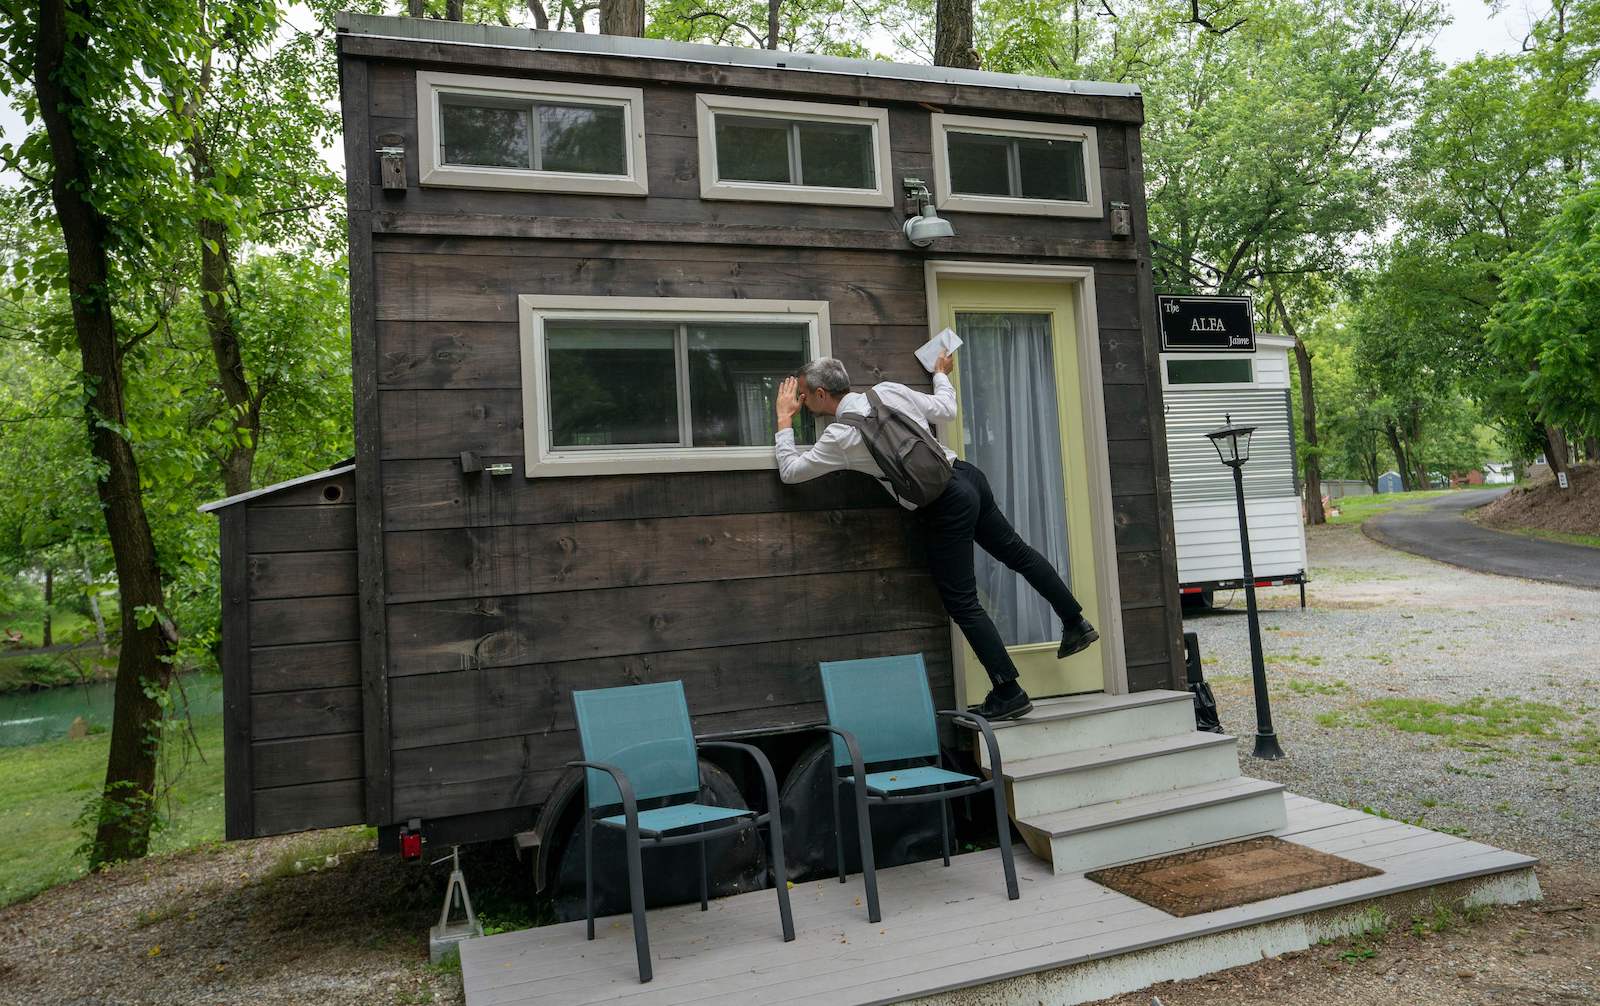 A man with a camera peers through the windows of a tiny house